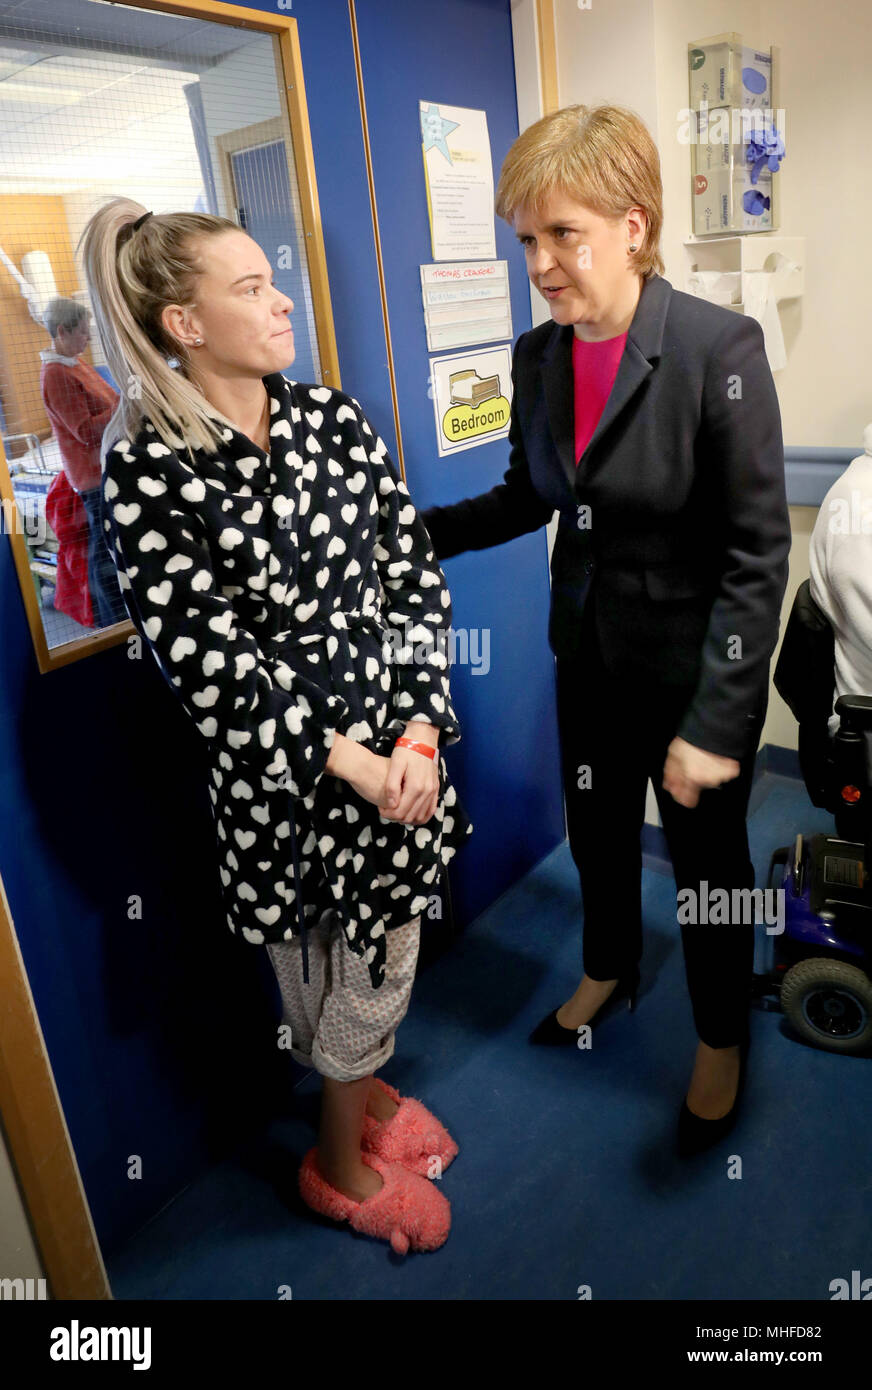 First Minister Nicola Sturgeon meets patient Charmaine Munro during a visit to the Edinburgh Royal Infirmary, as she marks the minimum unit pricing for alcohol coming into force and meet patients with chronic liver problems and specialist clinicians. Stock Photo